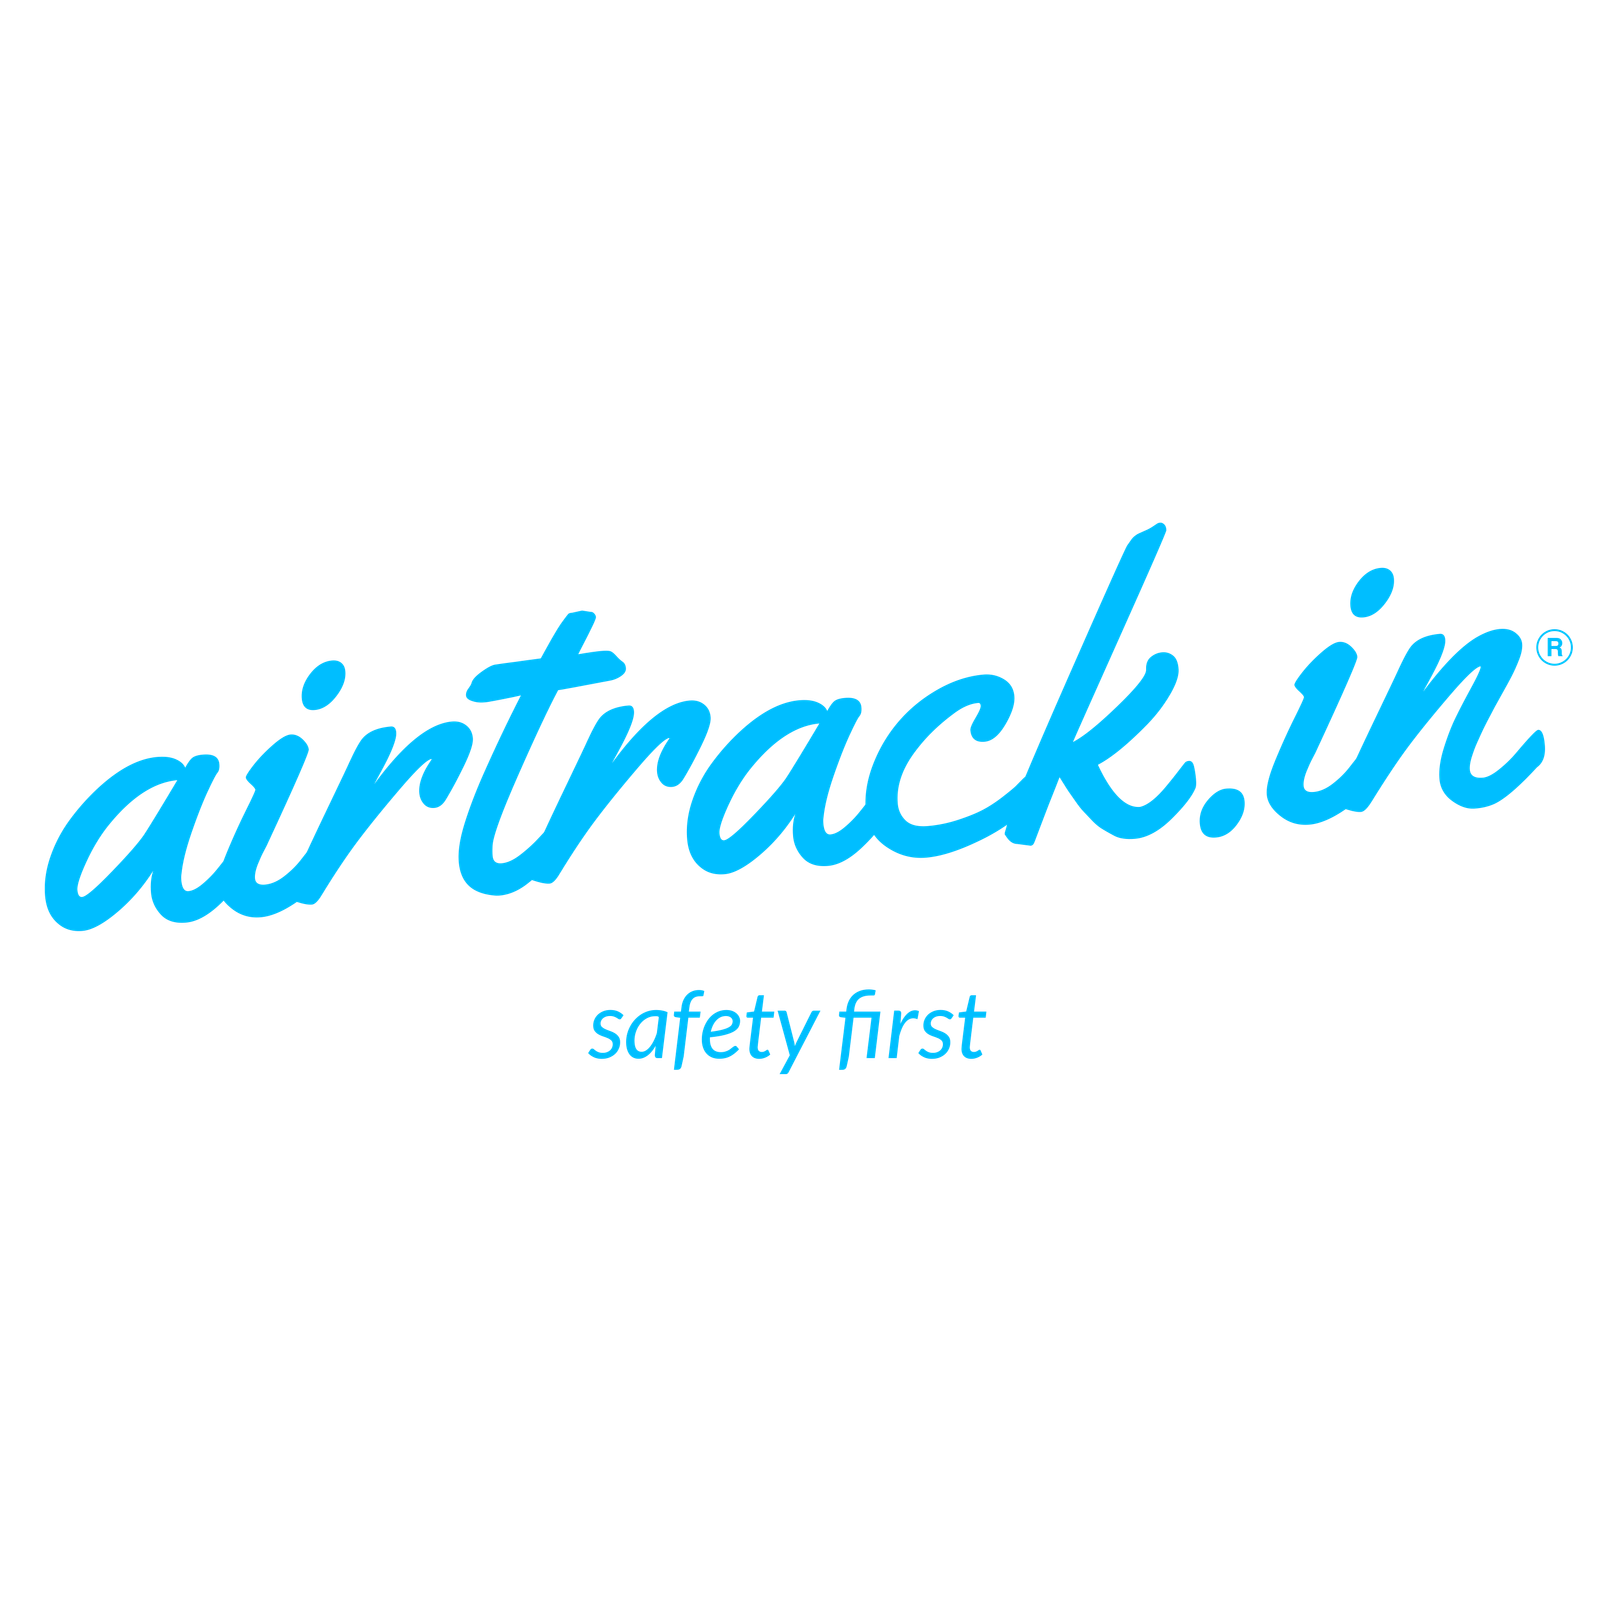 Airtrack India